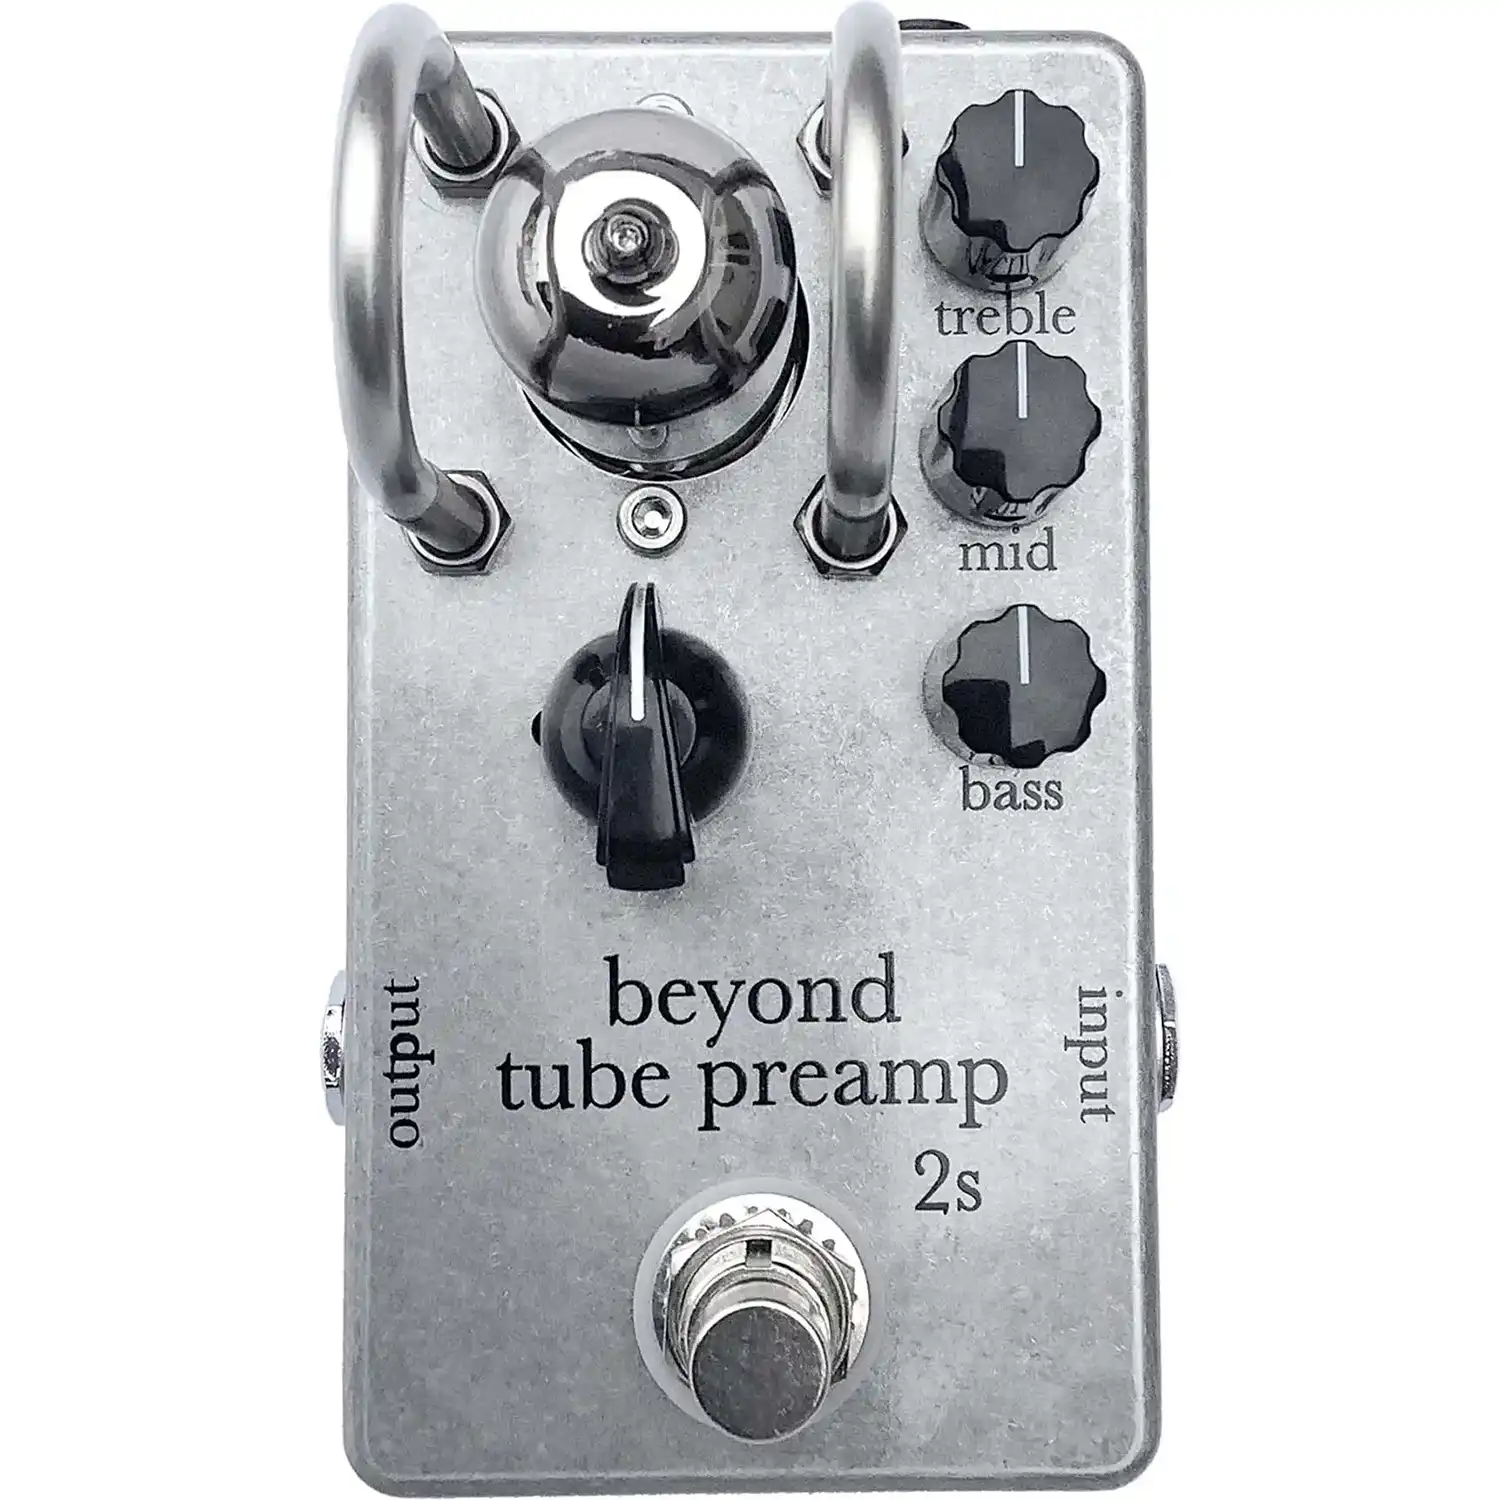 beyond tube preamp 2s image